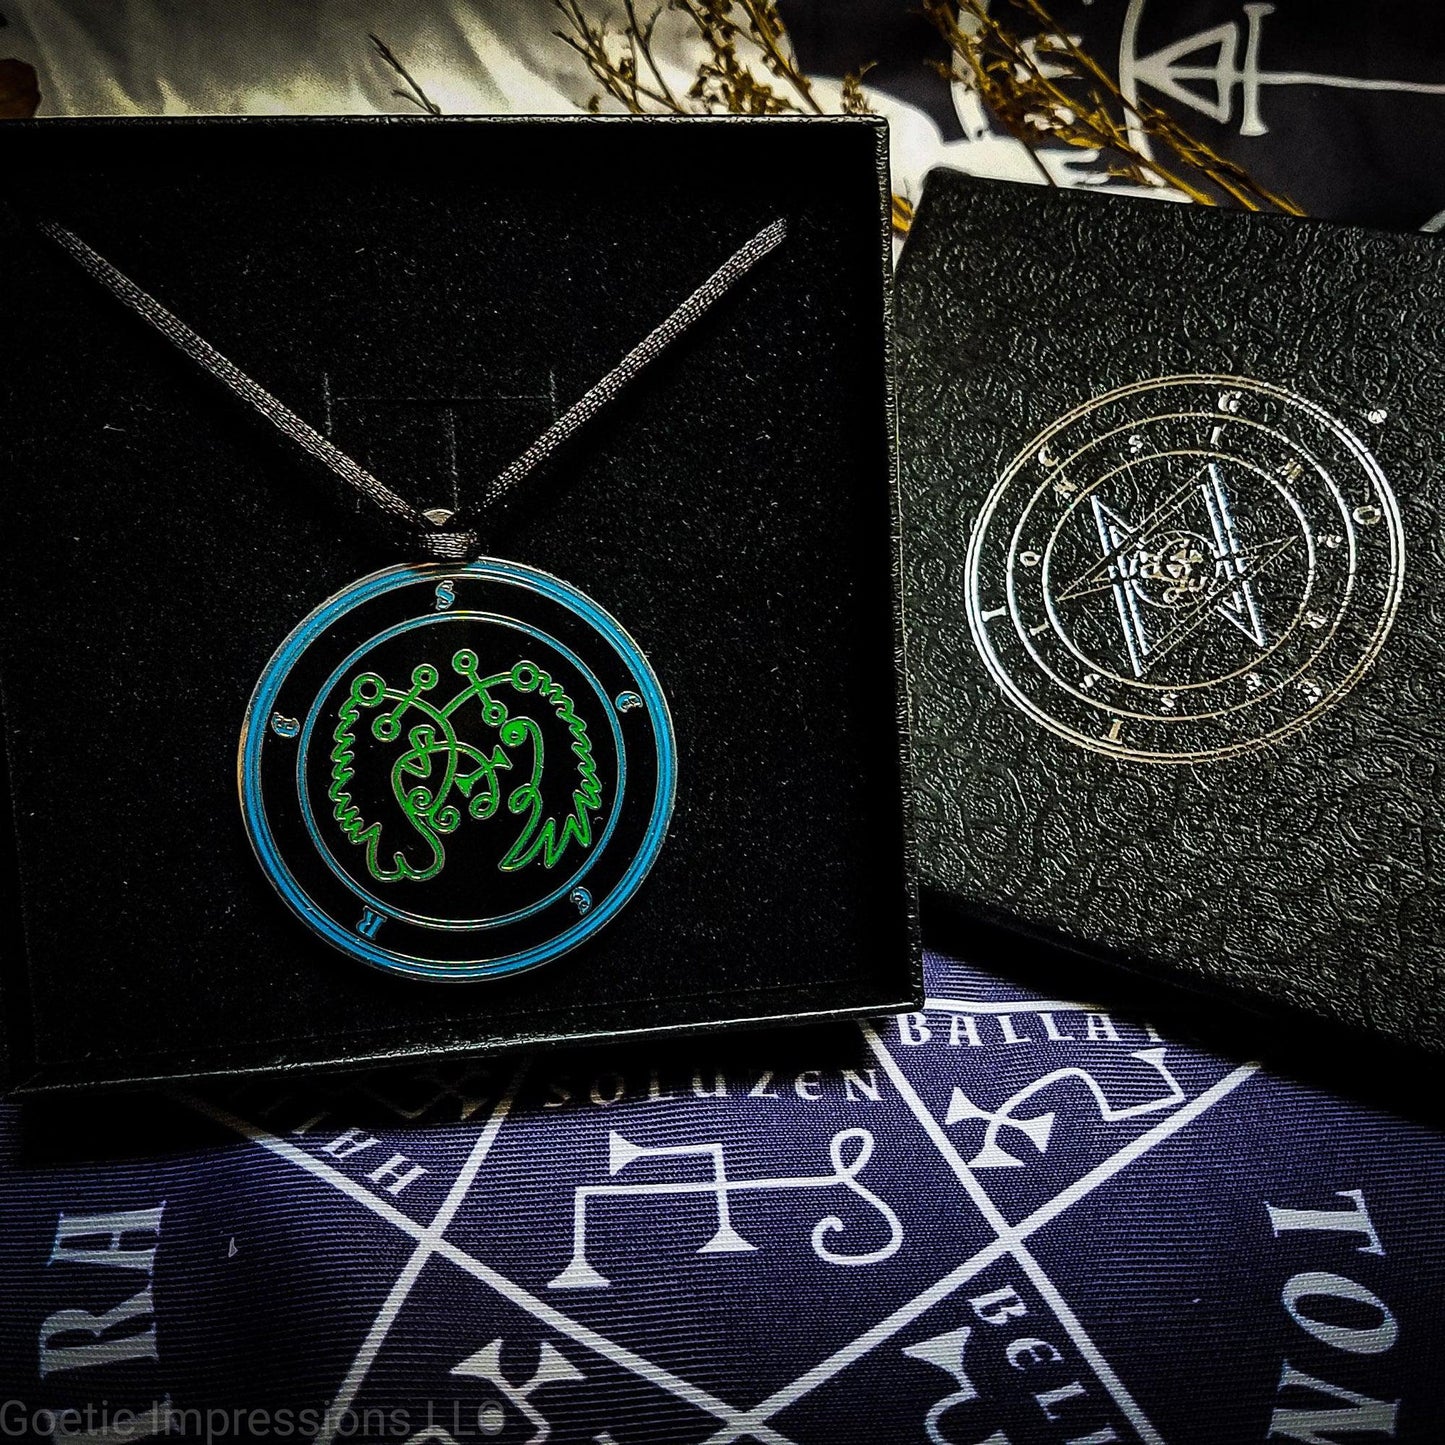 Necklace of Seere in a Goetic Impressions gift box stamped in silver foil. The sigil for Seere is green. Seere's name is surrounding the sigil with concentric circles in blue on a black background.  The seal is silver plated. The box is on a purple altar cloth with the Tetragrammaton in white.